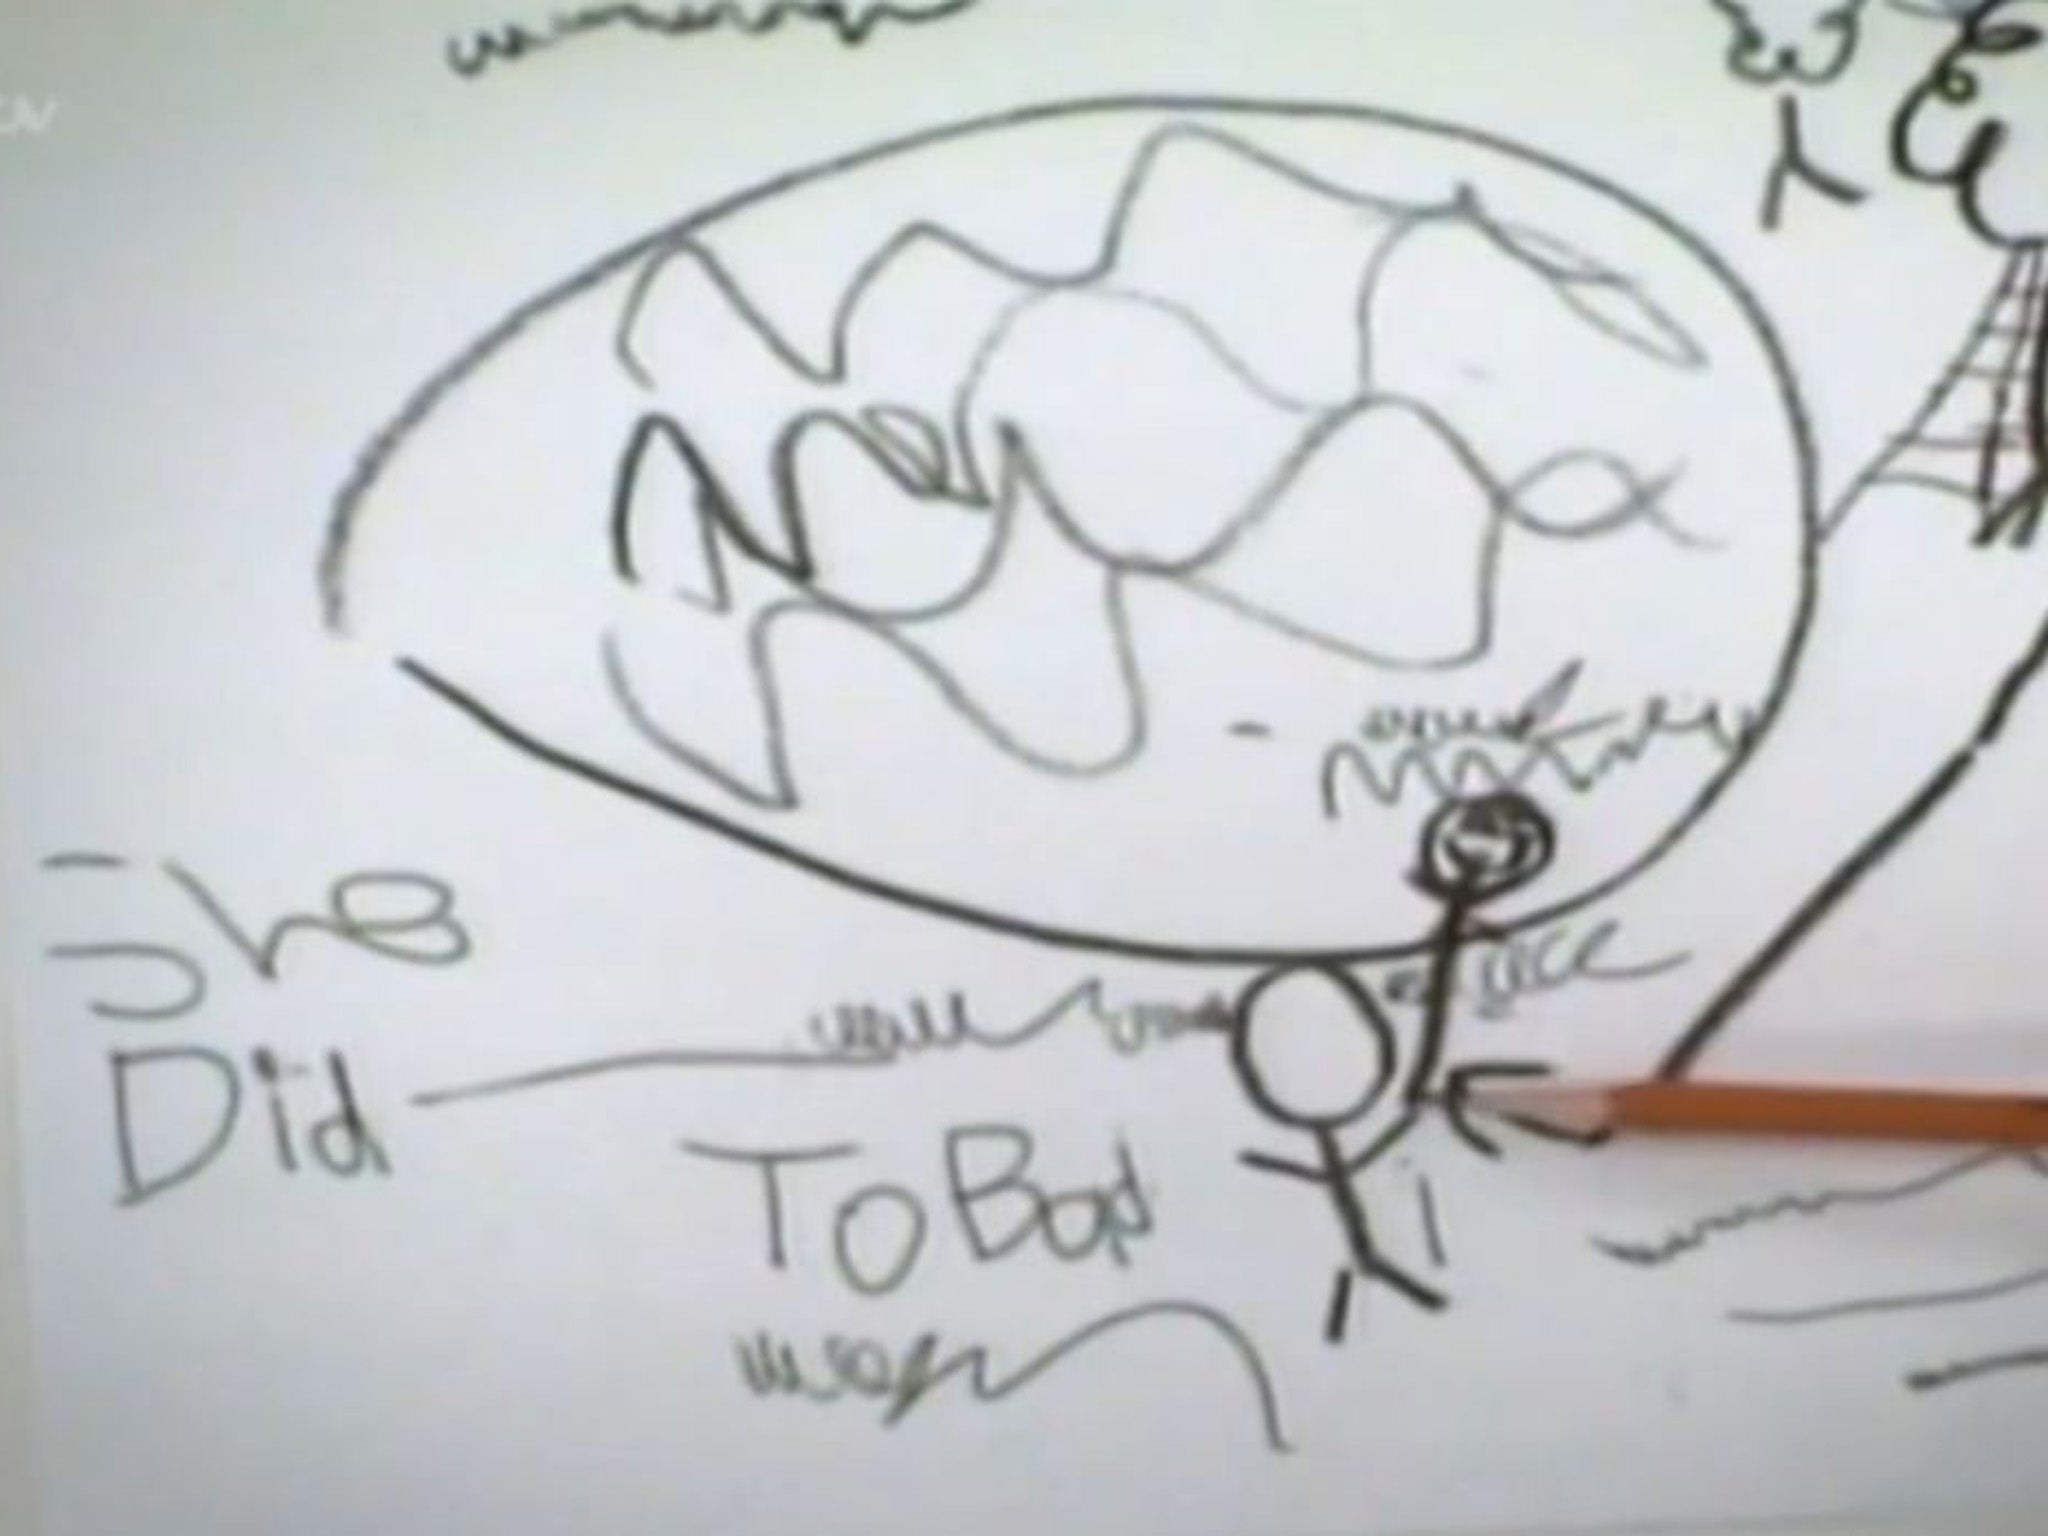 The picture AJ drew of the incident which he was asked to describe in court